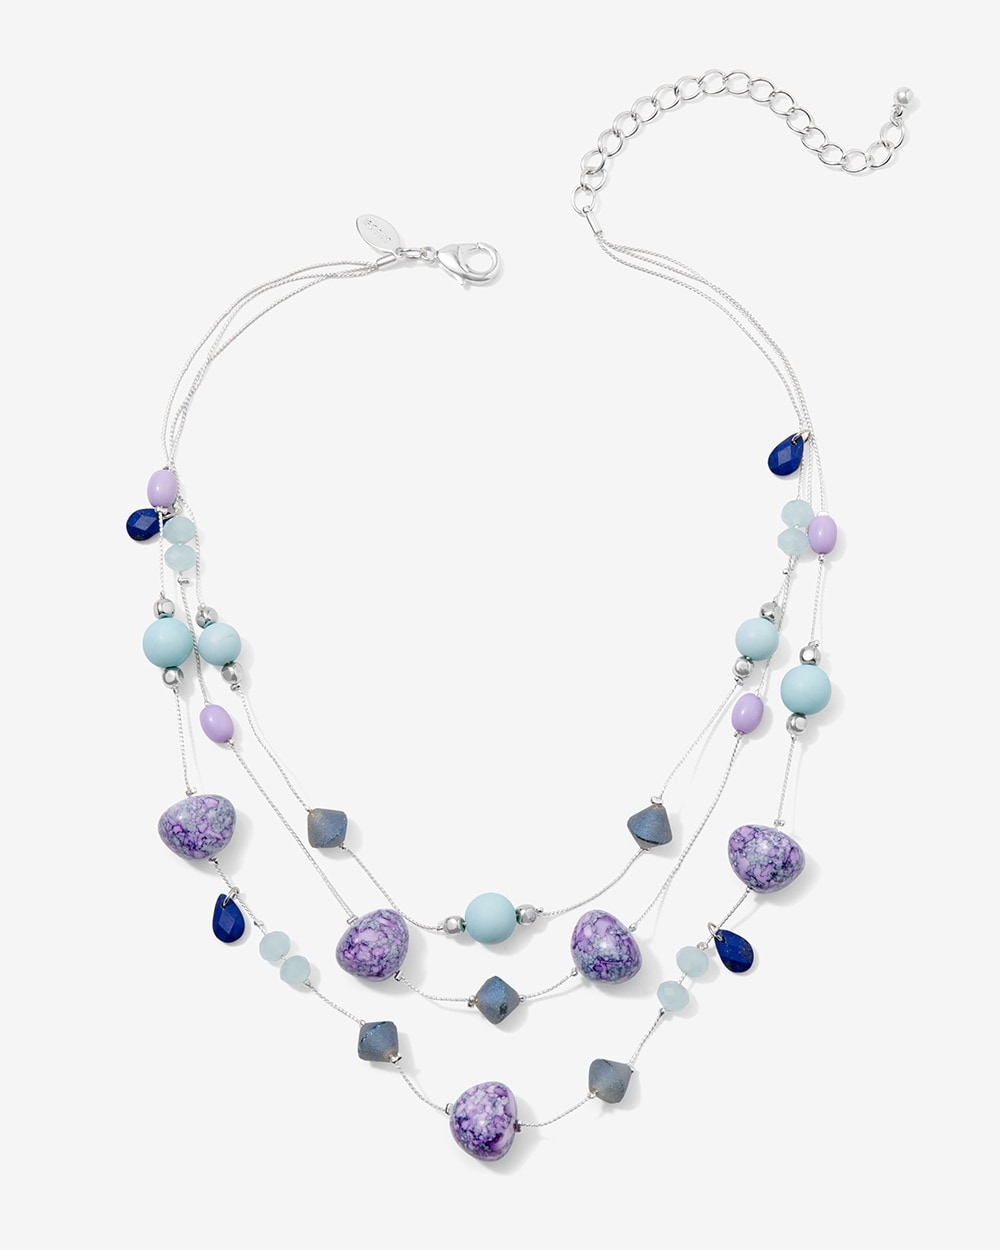 Summerlyn Crackled Bead Illusion Necklace